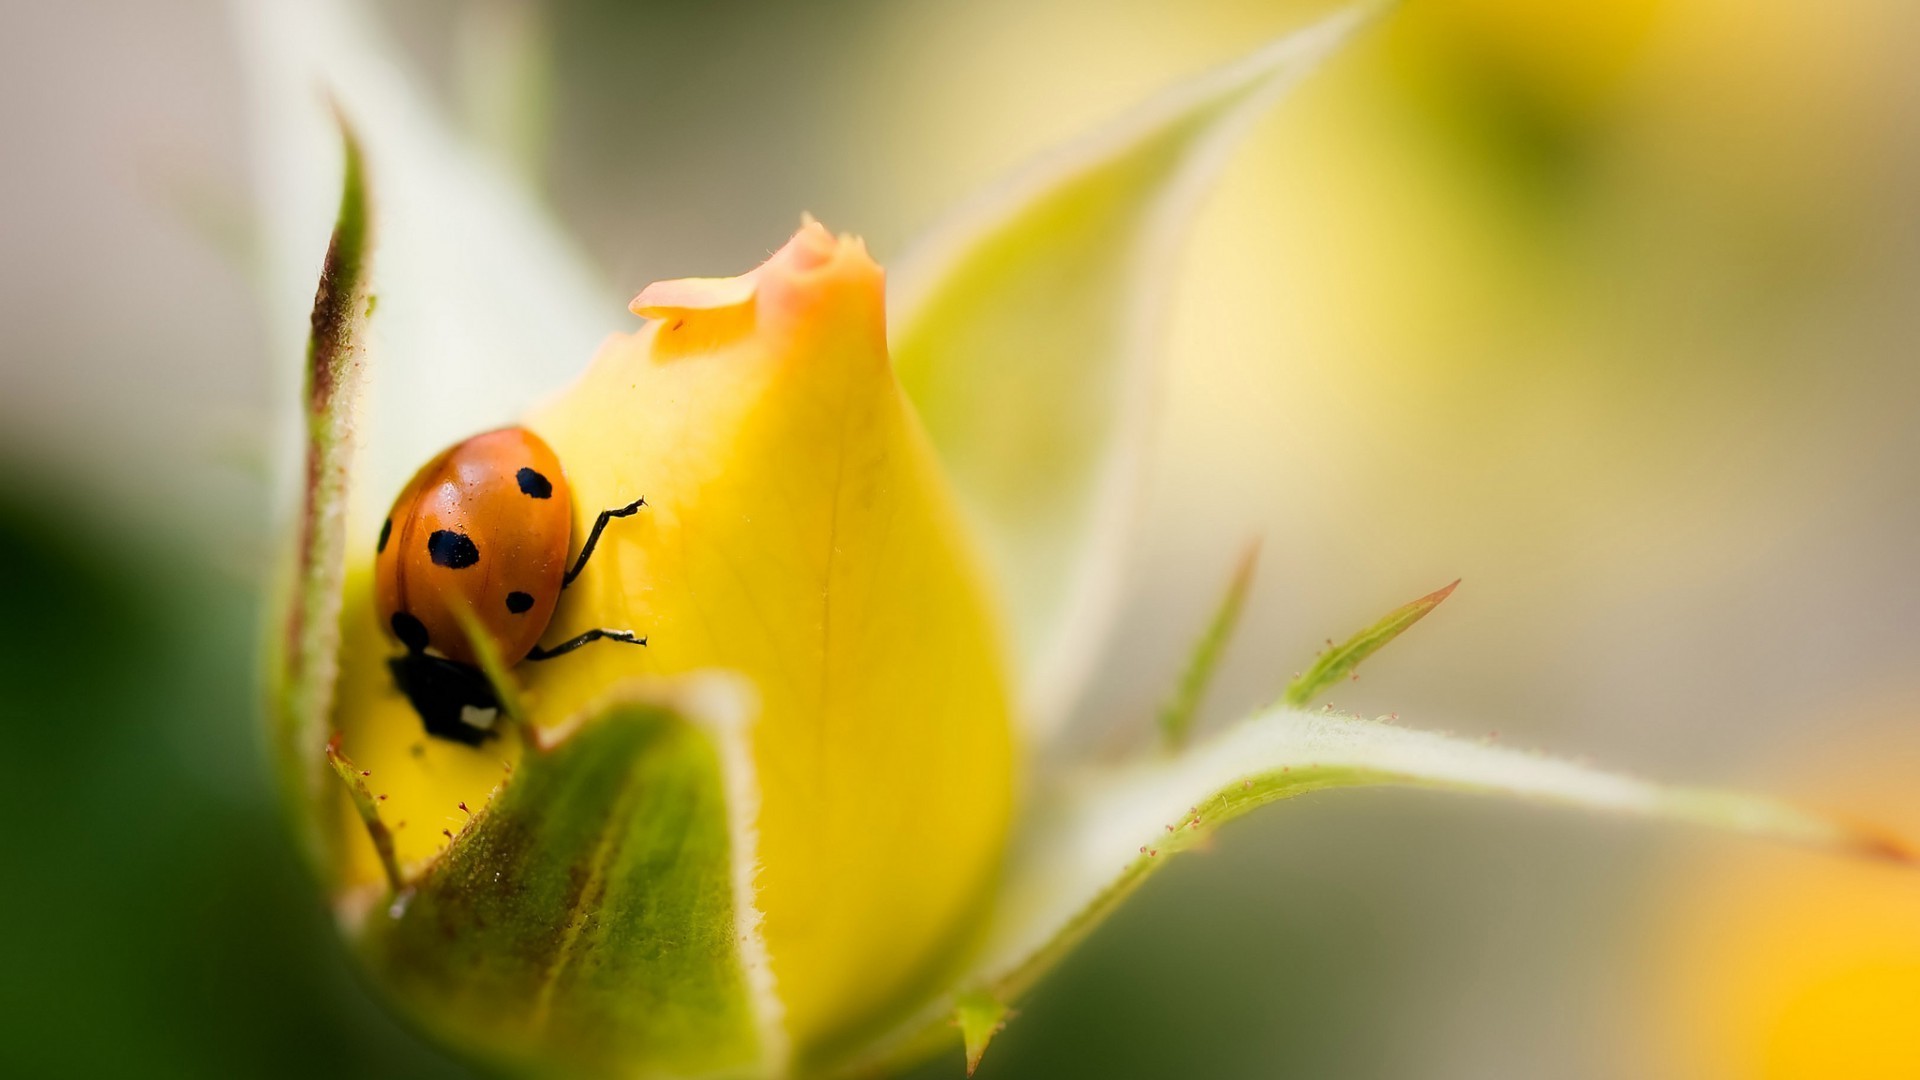 rose, Macro, Flowers, Ladybugs, Insect, Yellow Flowers Wallpaper